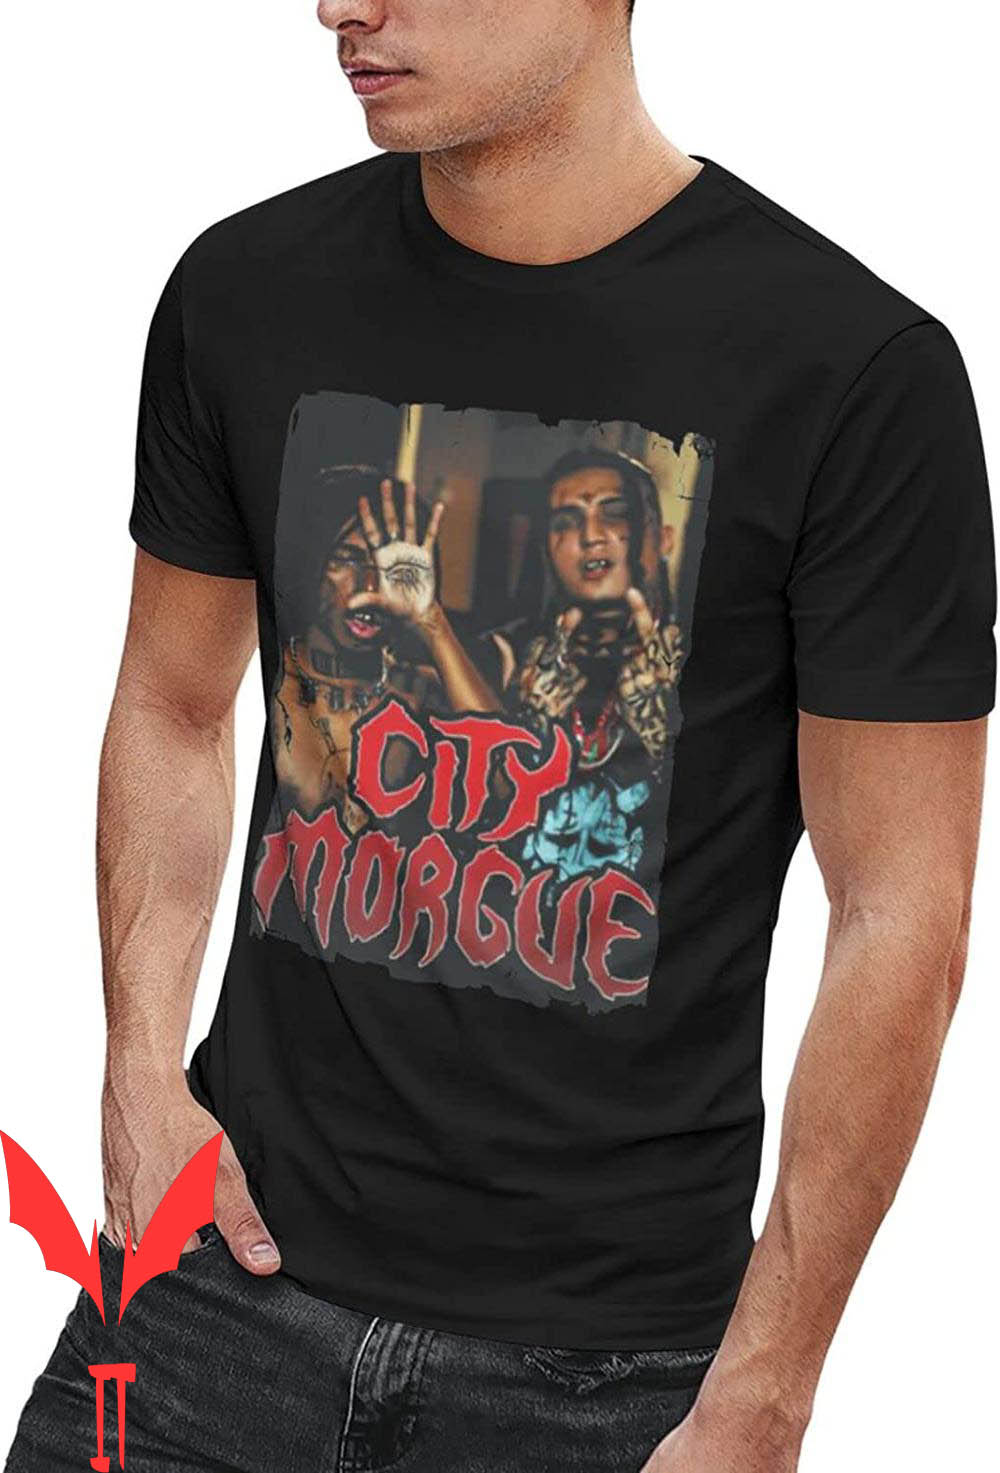 City Morgue Official Merchandise: Wear Your Dark Vibes